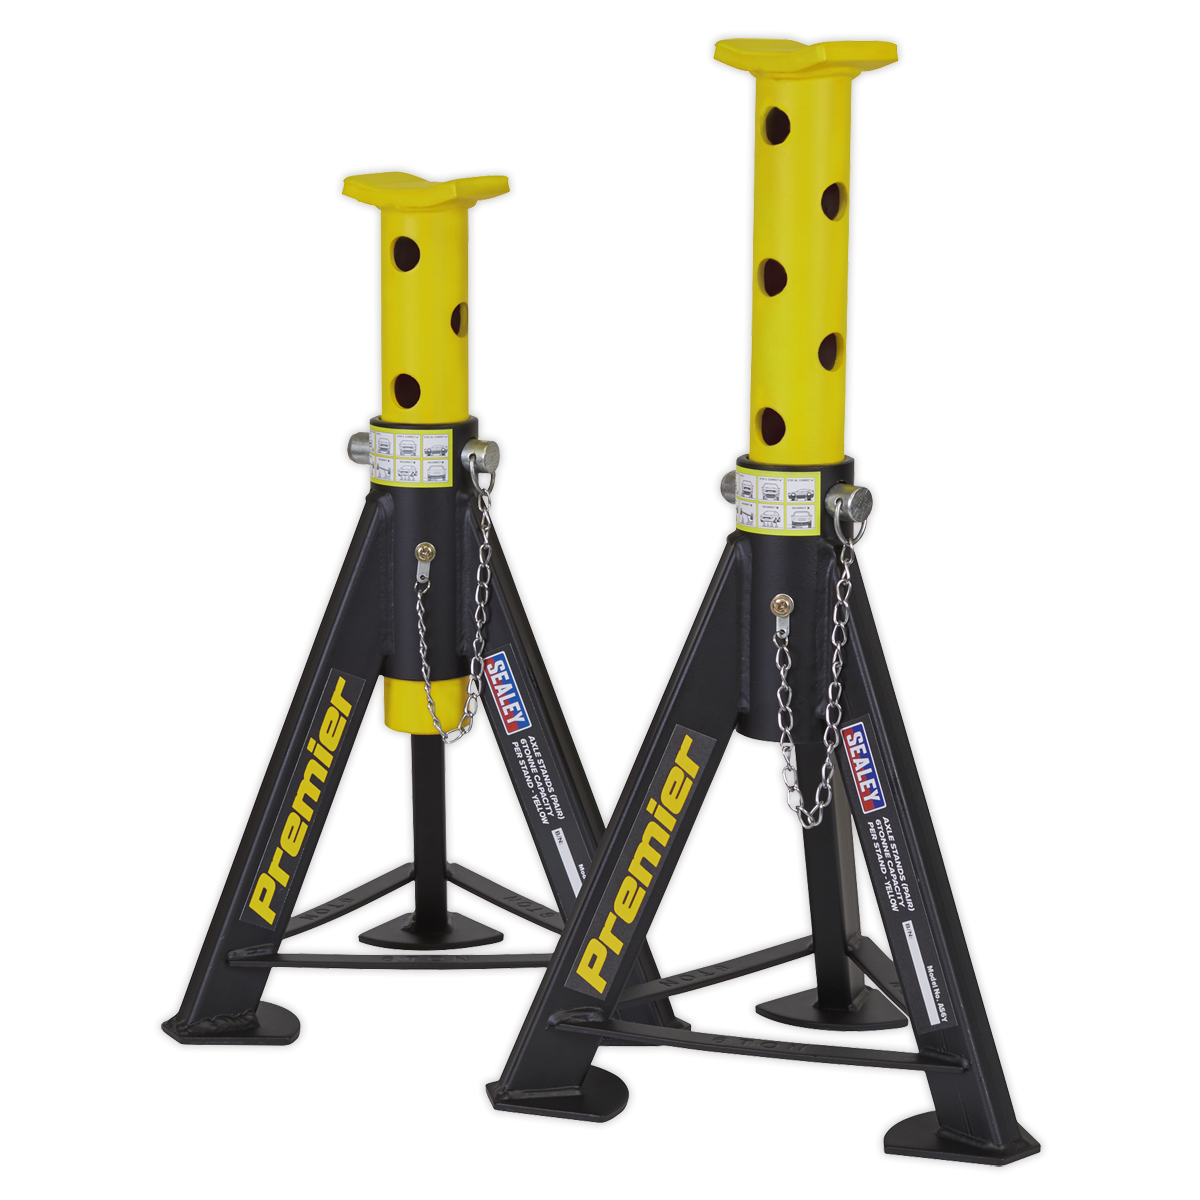 Sealey AS6Y Axle Stands (Pair) 6tonne Capacity per Stand - Yellow